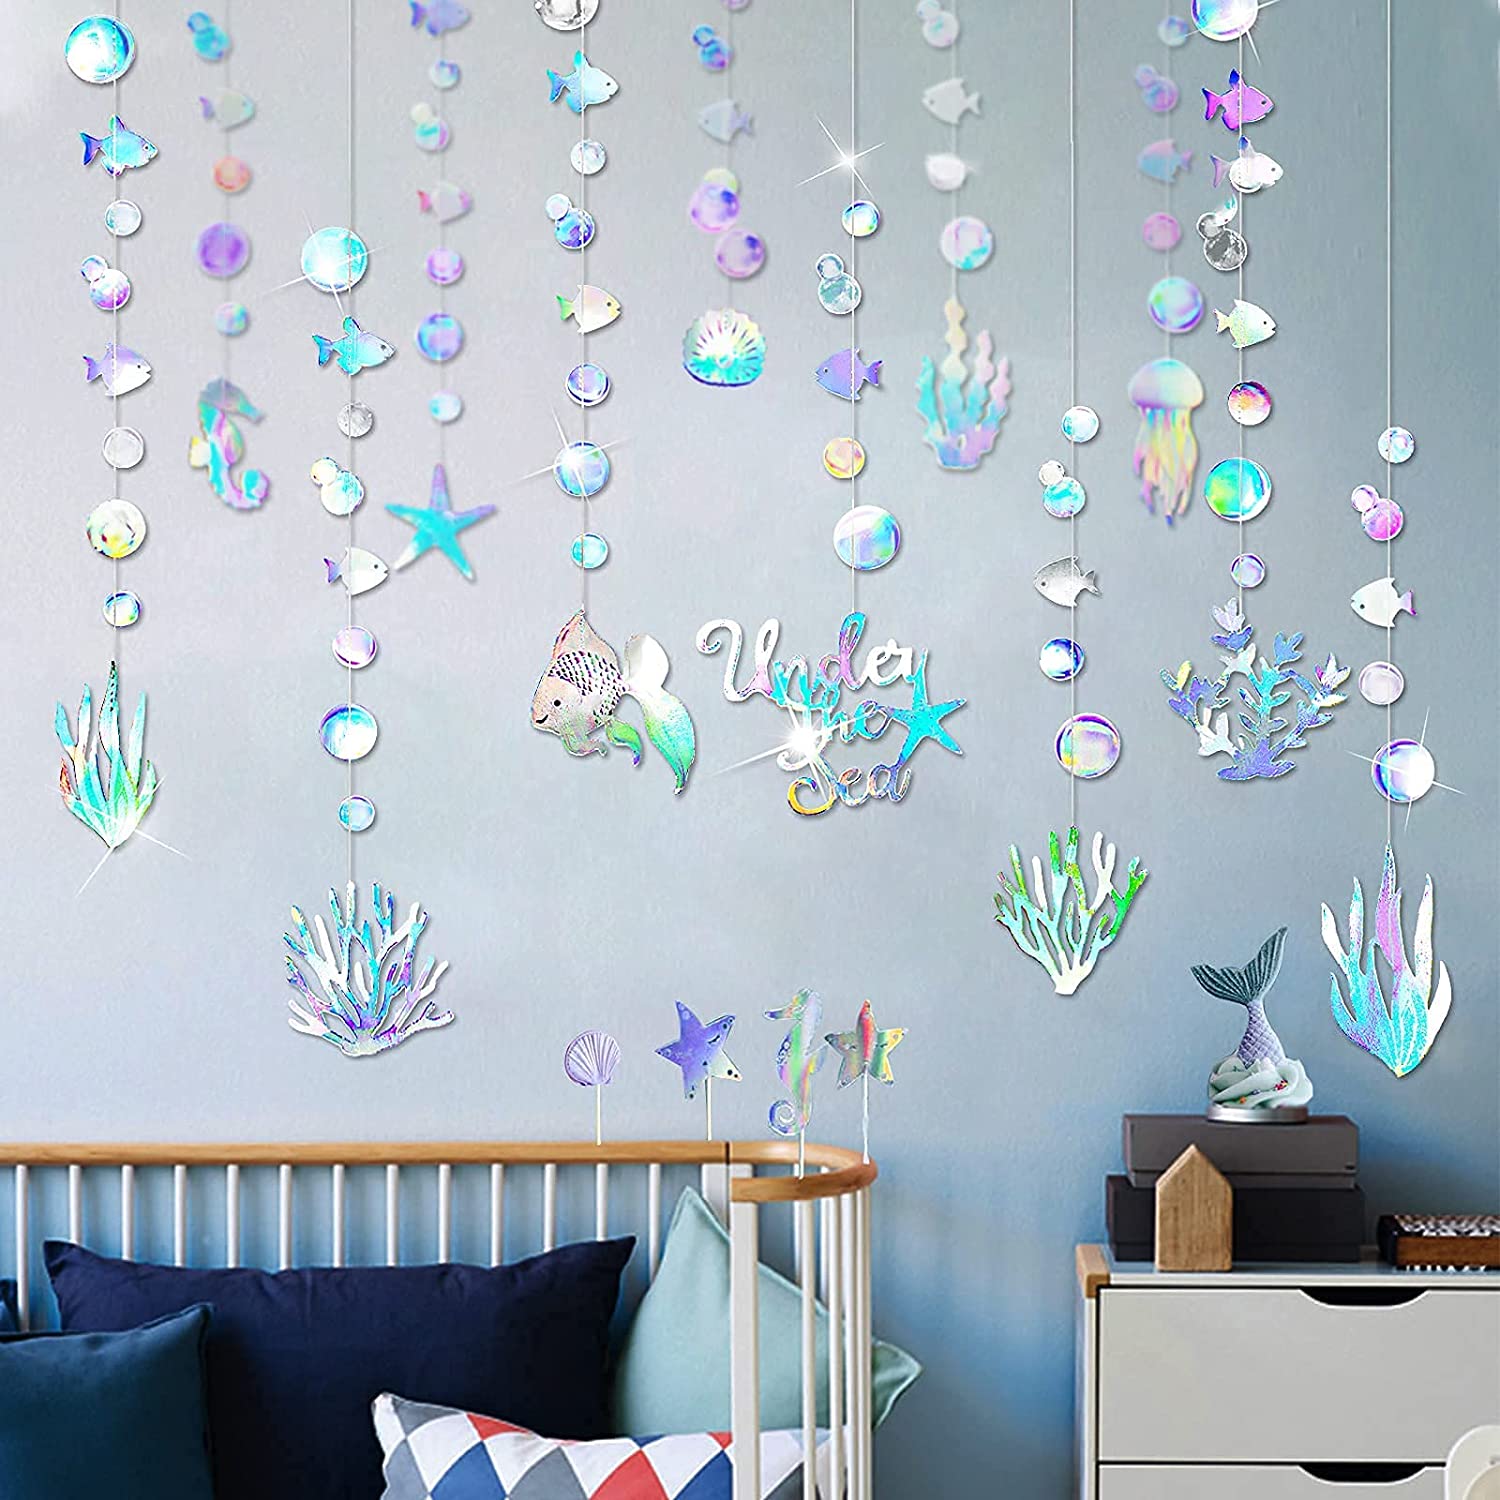 Cheerland Iridescent Under The Sea Party Garland Decoration for Mermaid Birthday Party Decorations Ocean Theme Banner Streamer Backdrop